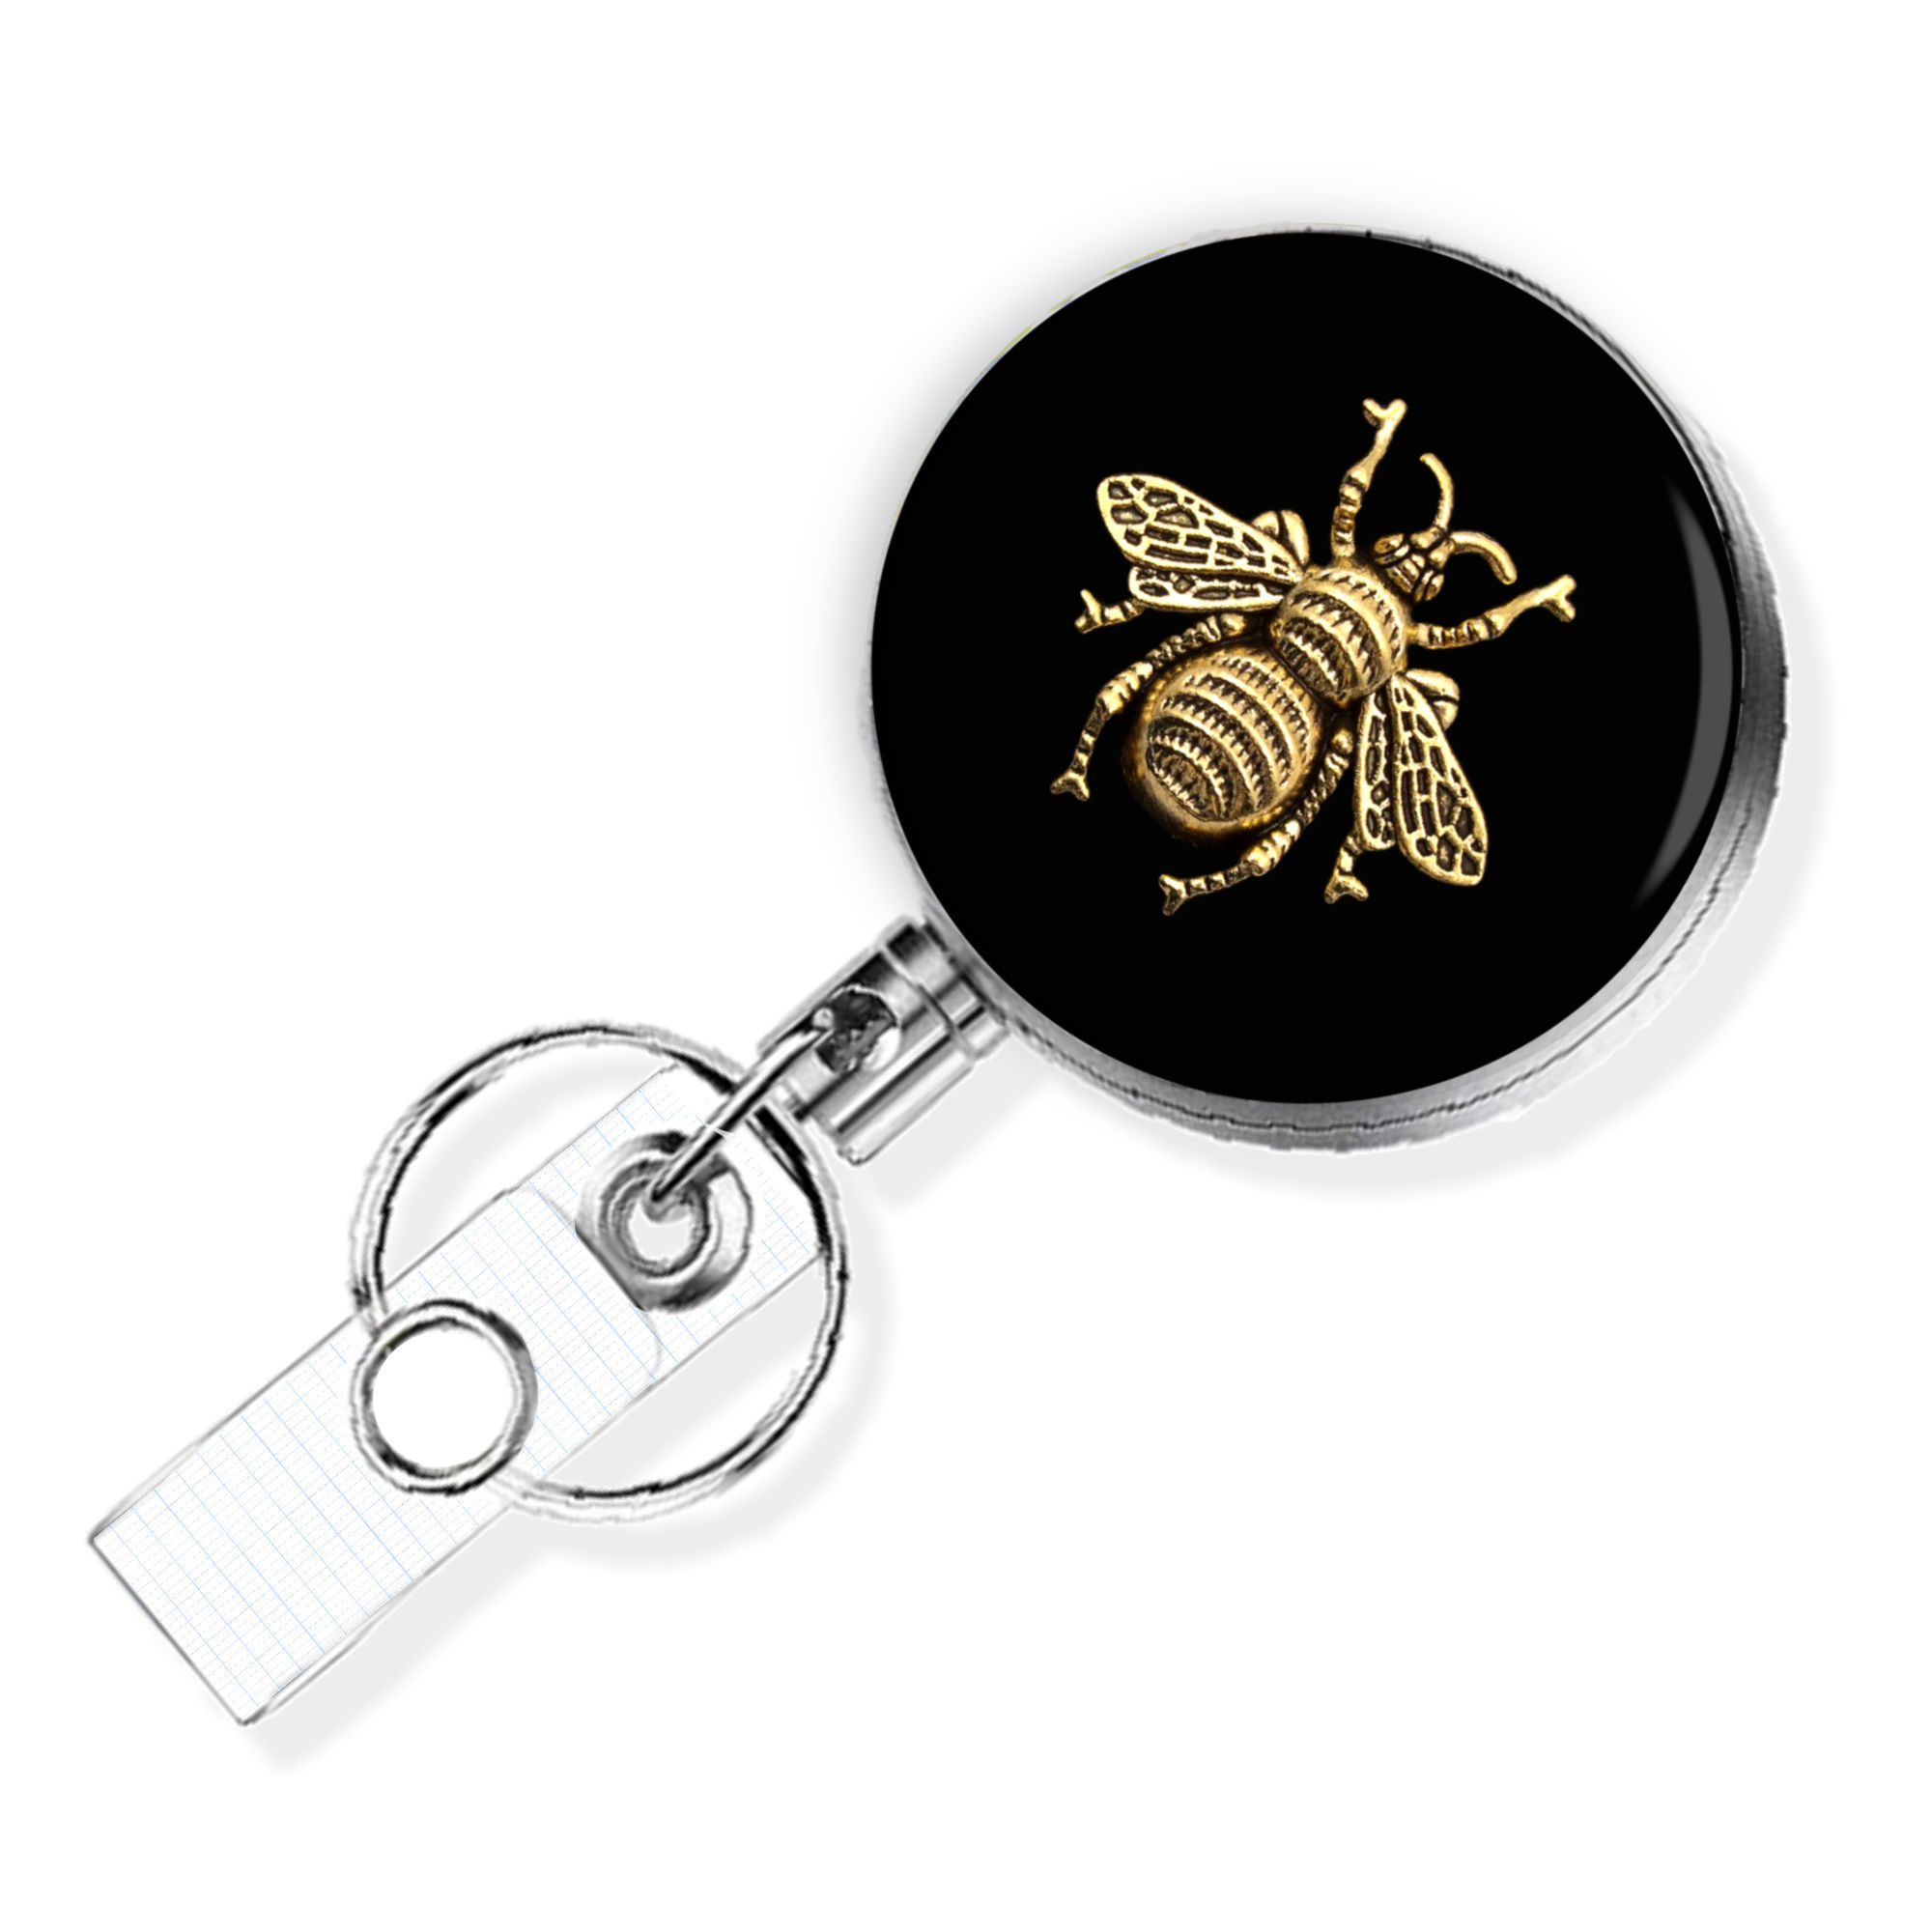 Bumble Bee retractable badge reel, queen bee name tag holder